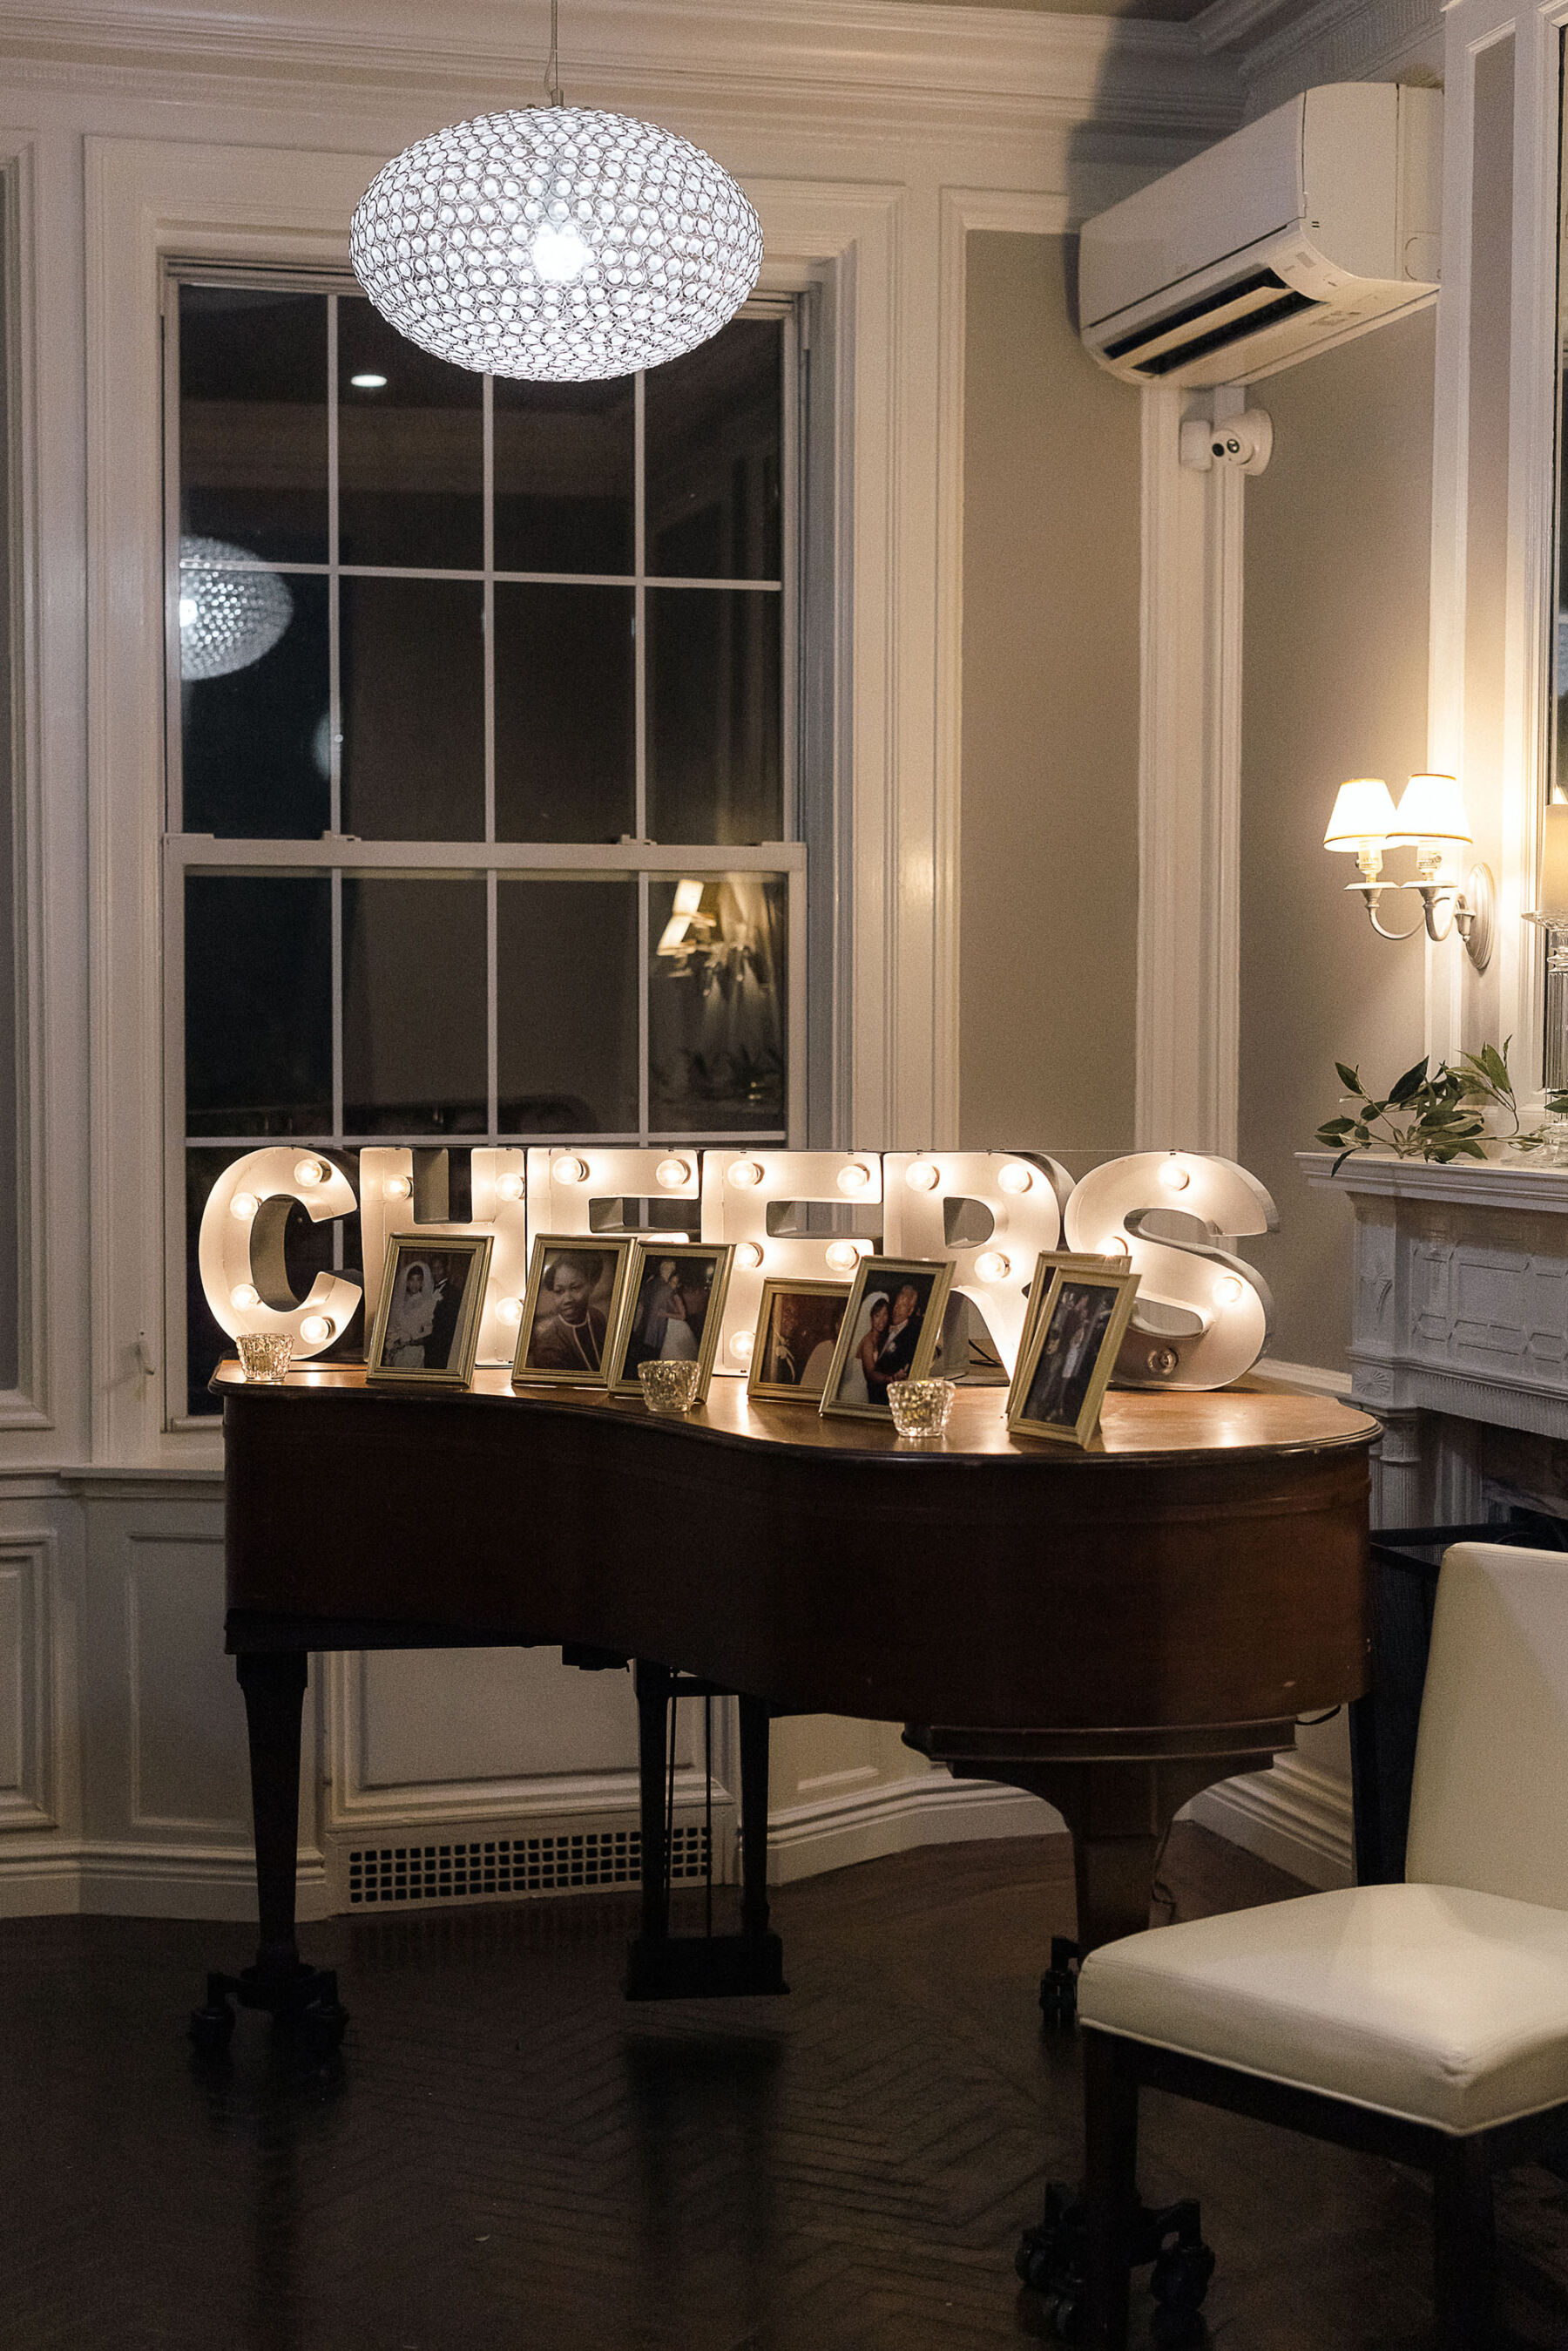 GIFTS in light up letters - wedding decor